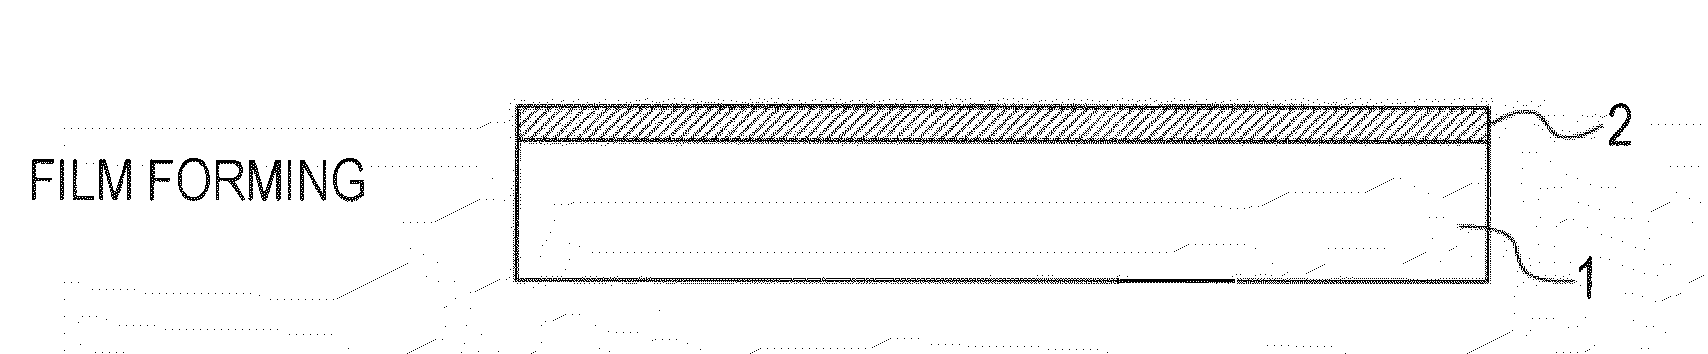 Disc master, disc master manufacturing method, stamper, disc substrate, optical disc, and optical disc manufacturing method